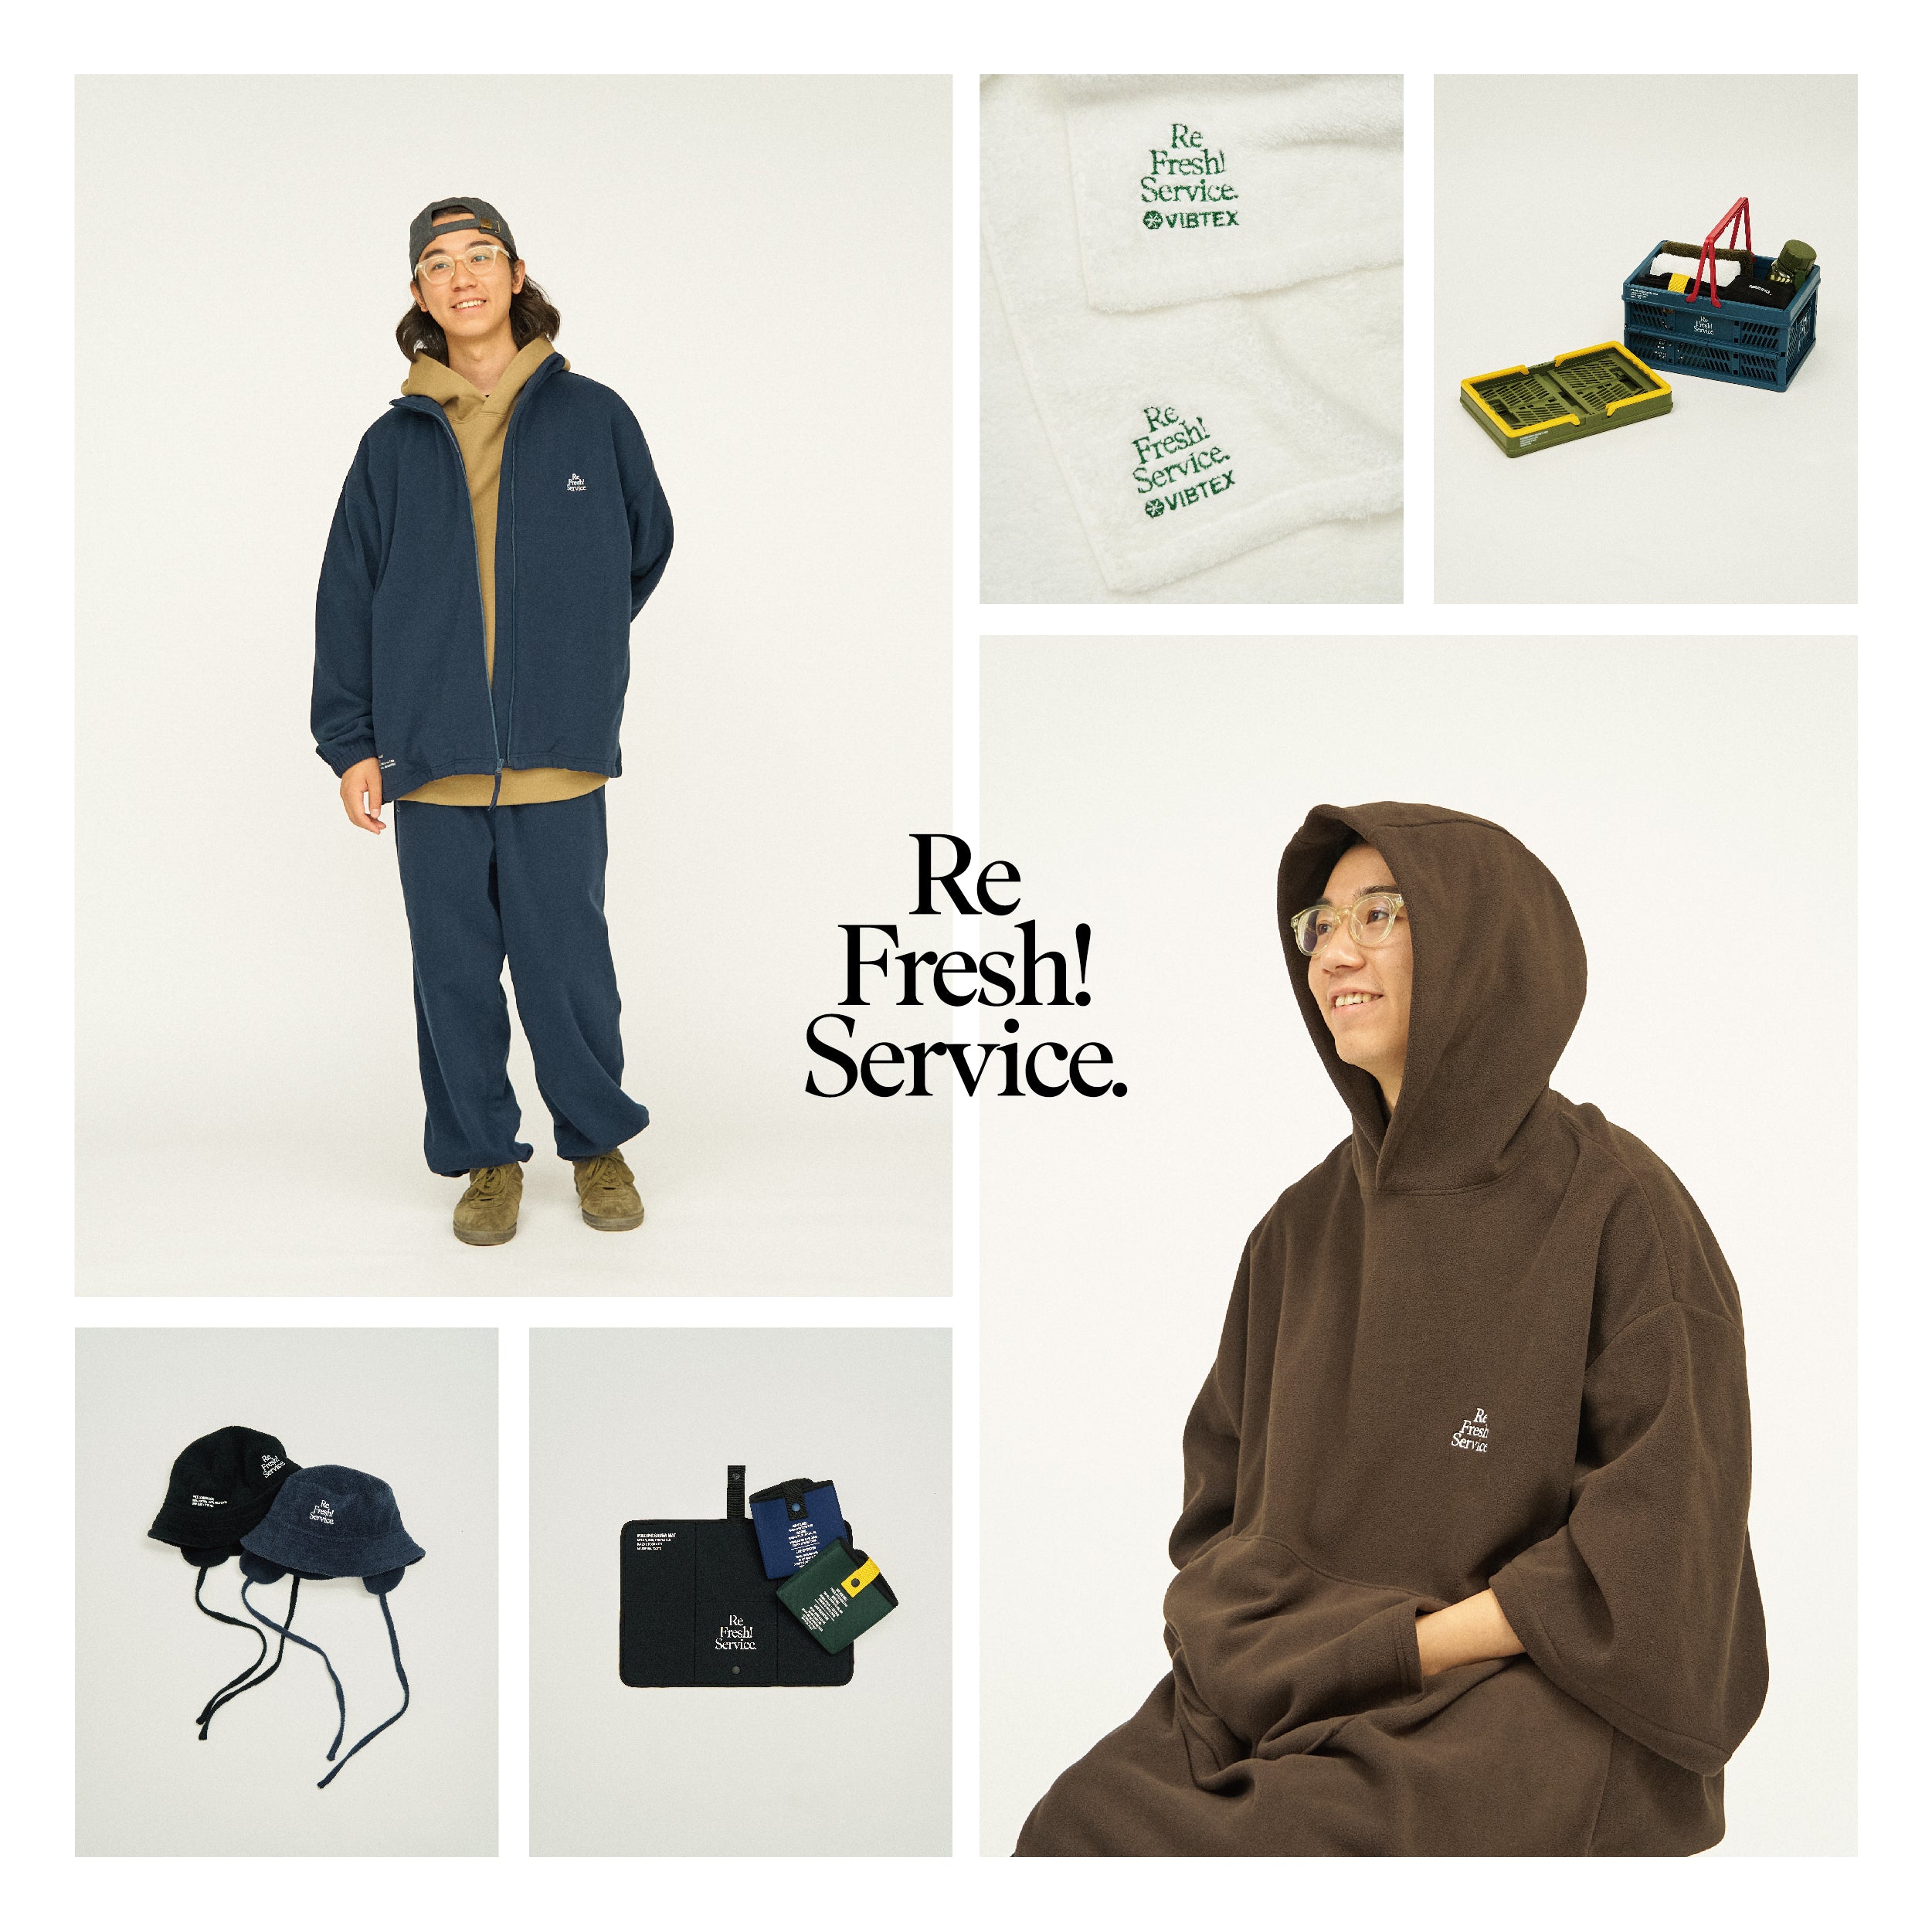 ReFresh!Service. 」第2弾 発売のお知らせ – FreshService® official site